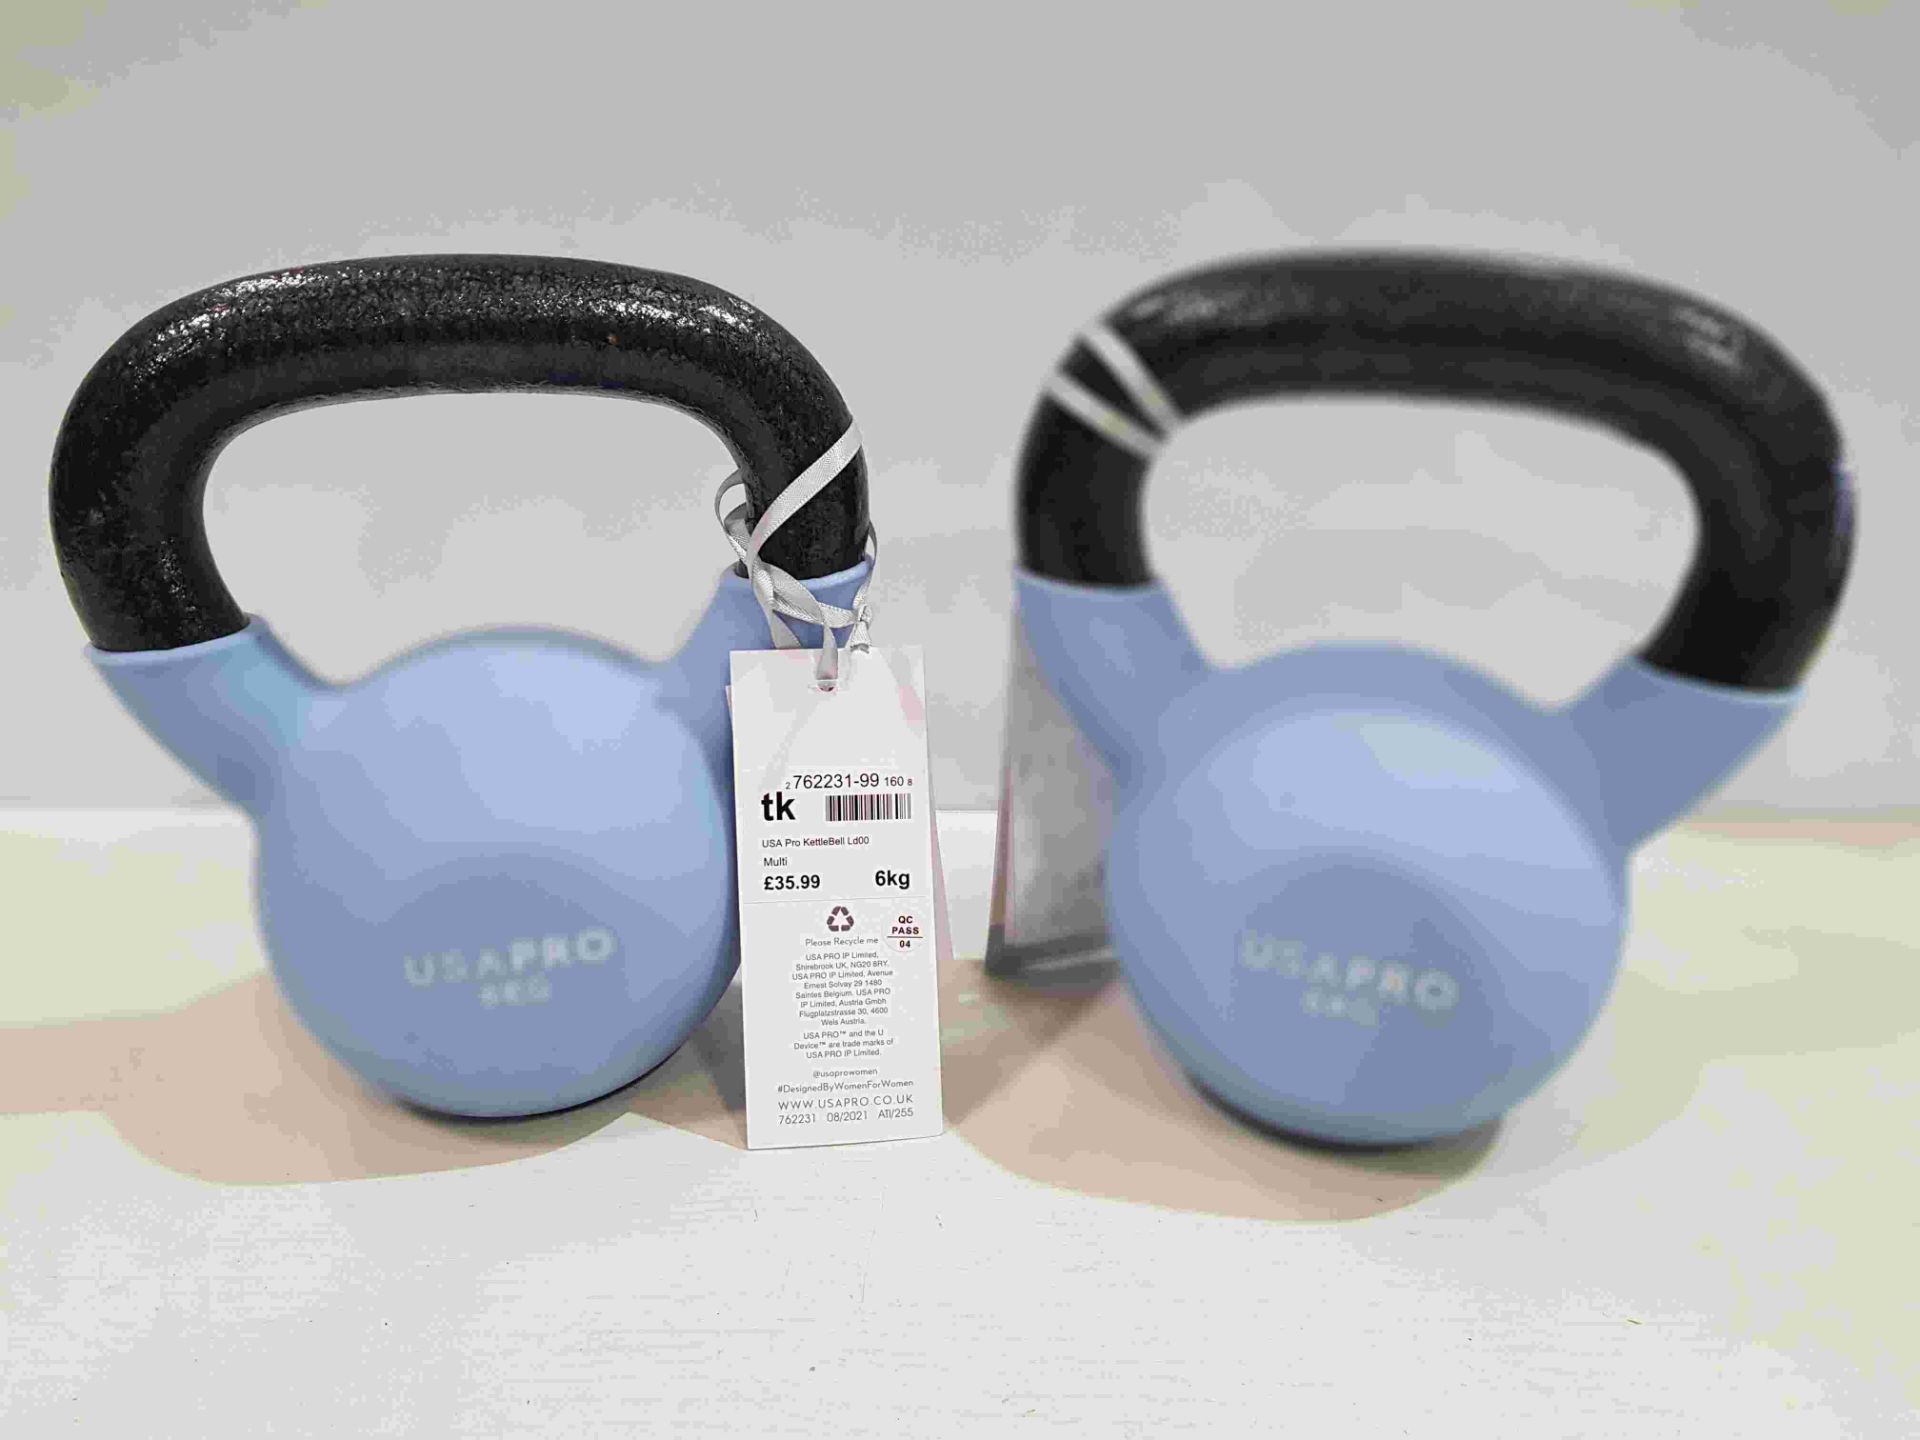 24 X BRAND NEW USA PRO 6 KG KETTLE BELL EXERCISE WEIGHTS (12 PAIRS) - RRP £35.99 PP £71.98 PER